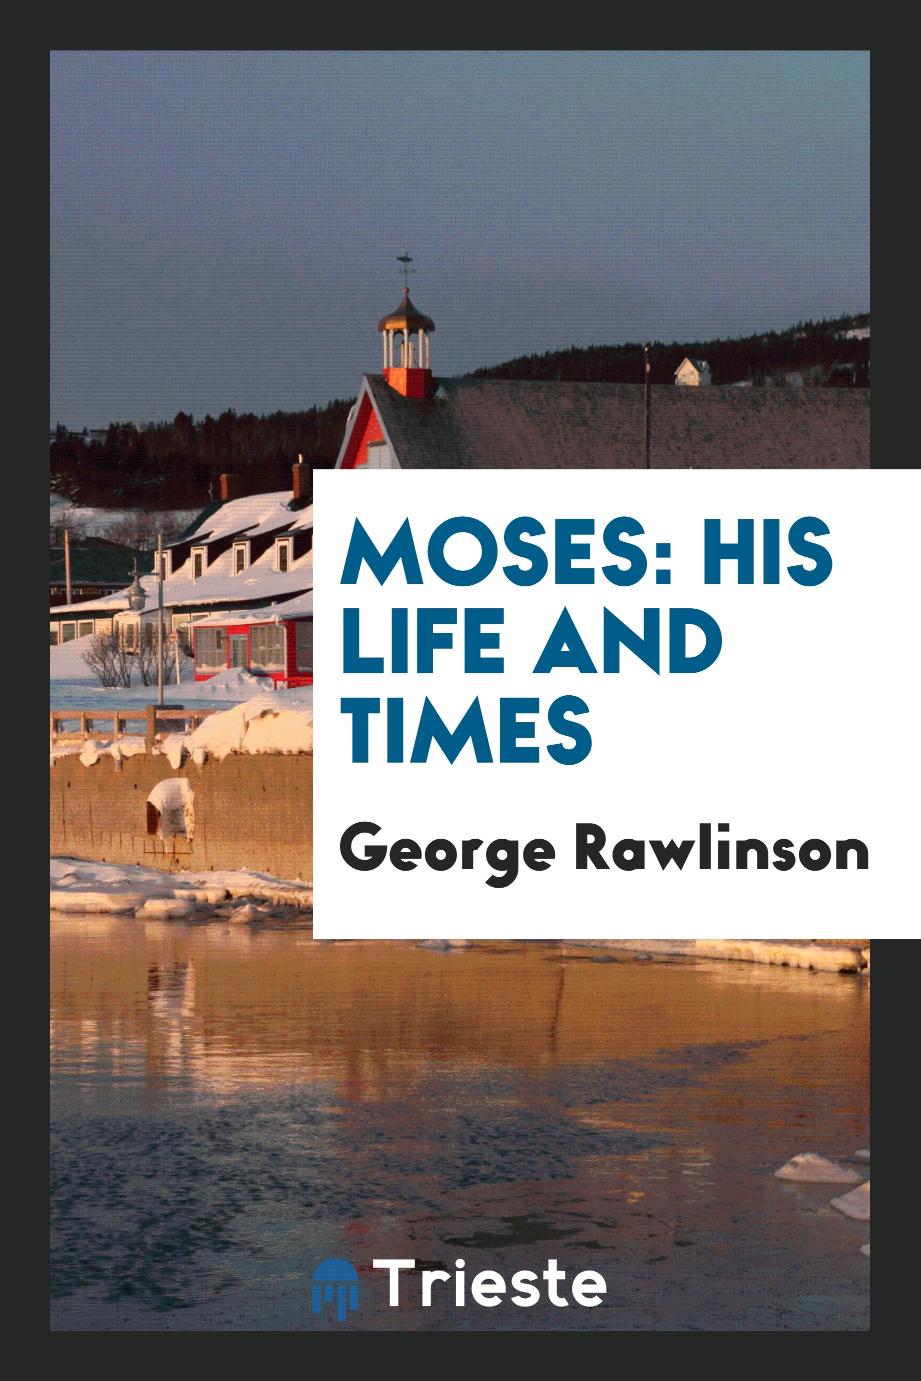 Moses: his life and times